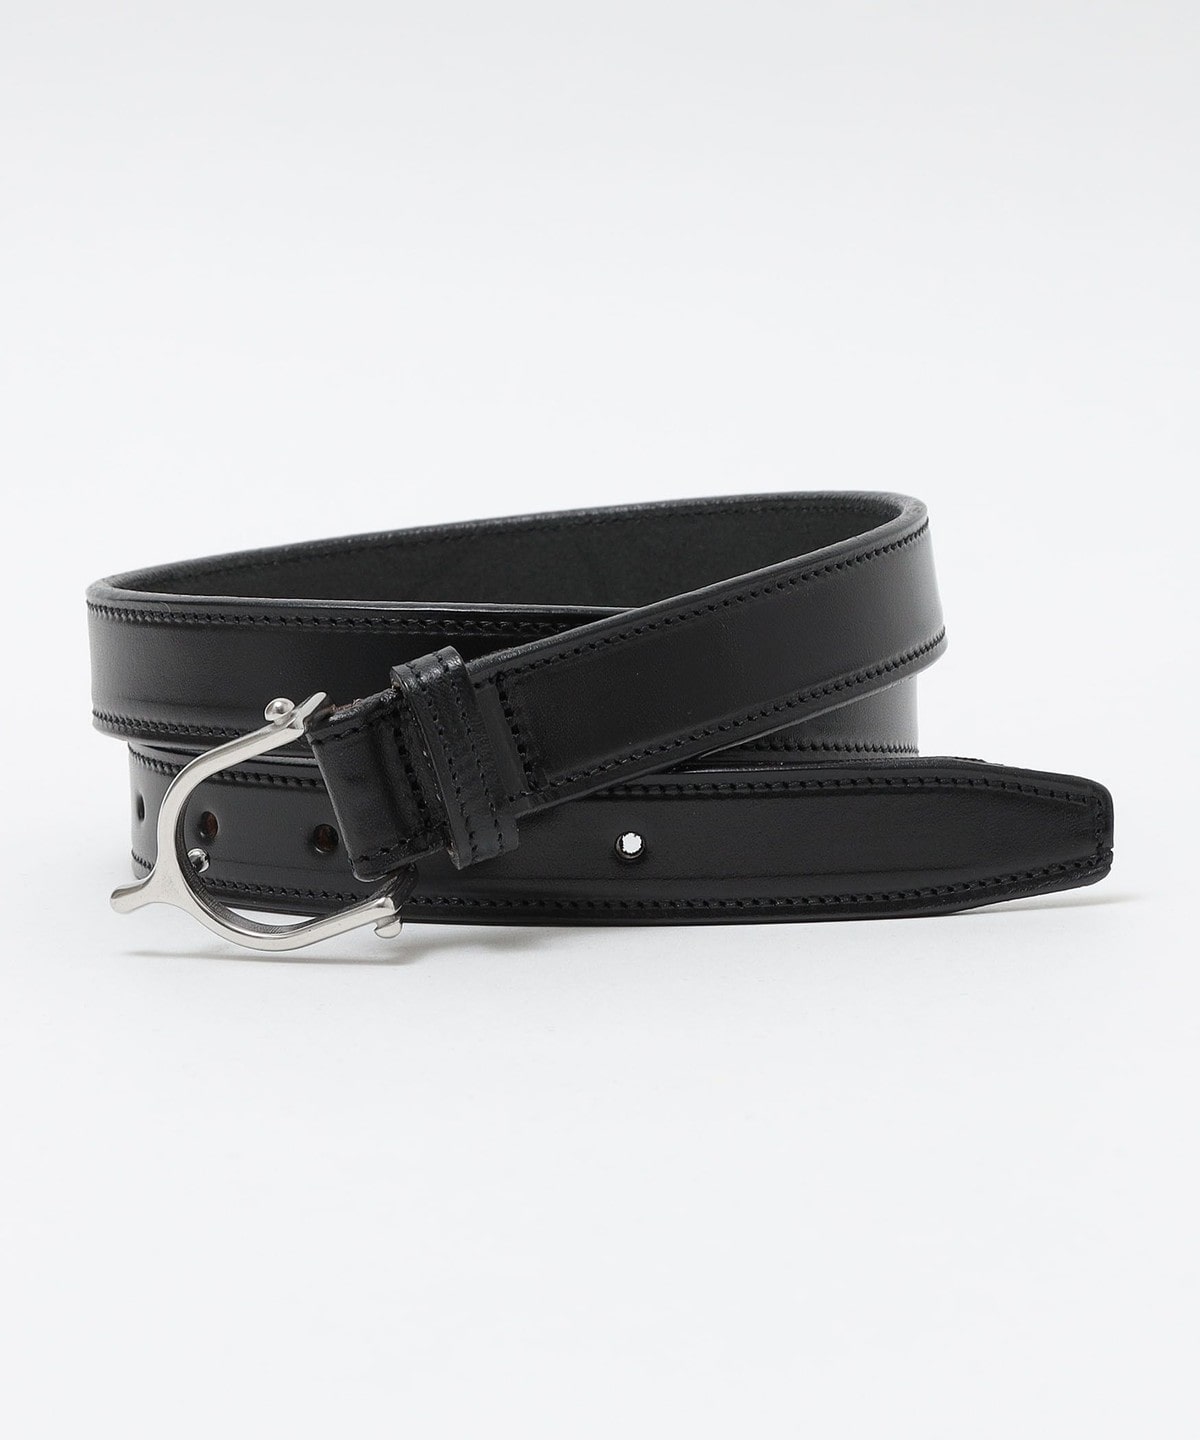 TORY LEATHER: 1 SPUR BUCKLES ベルト ブラック